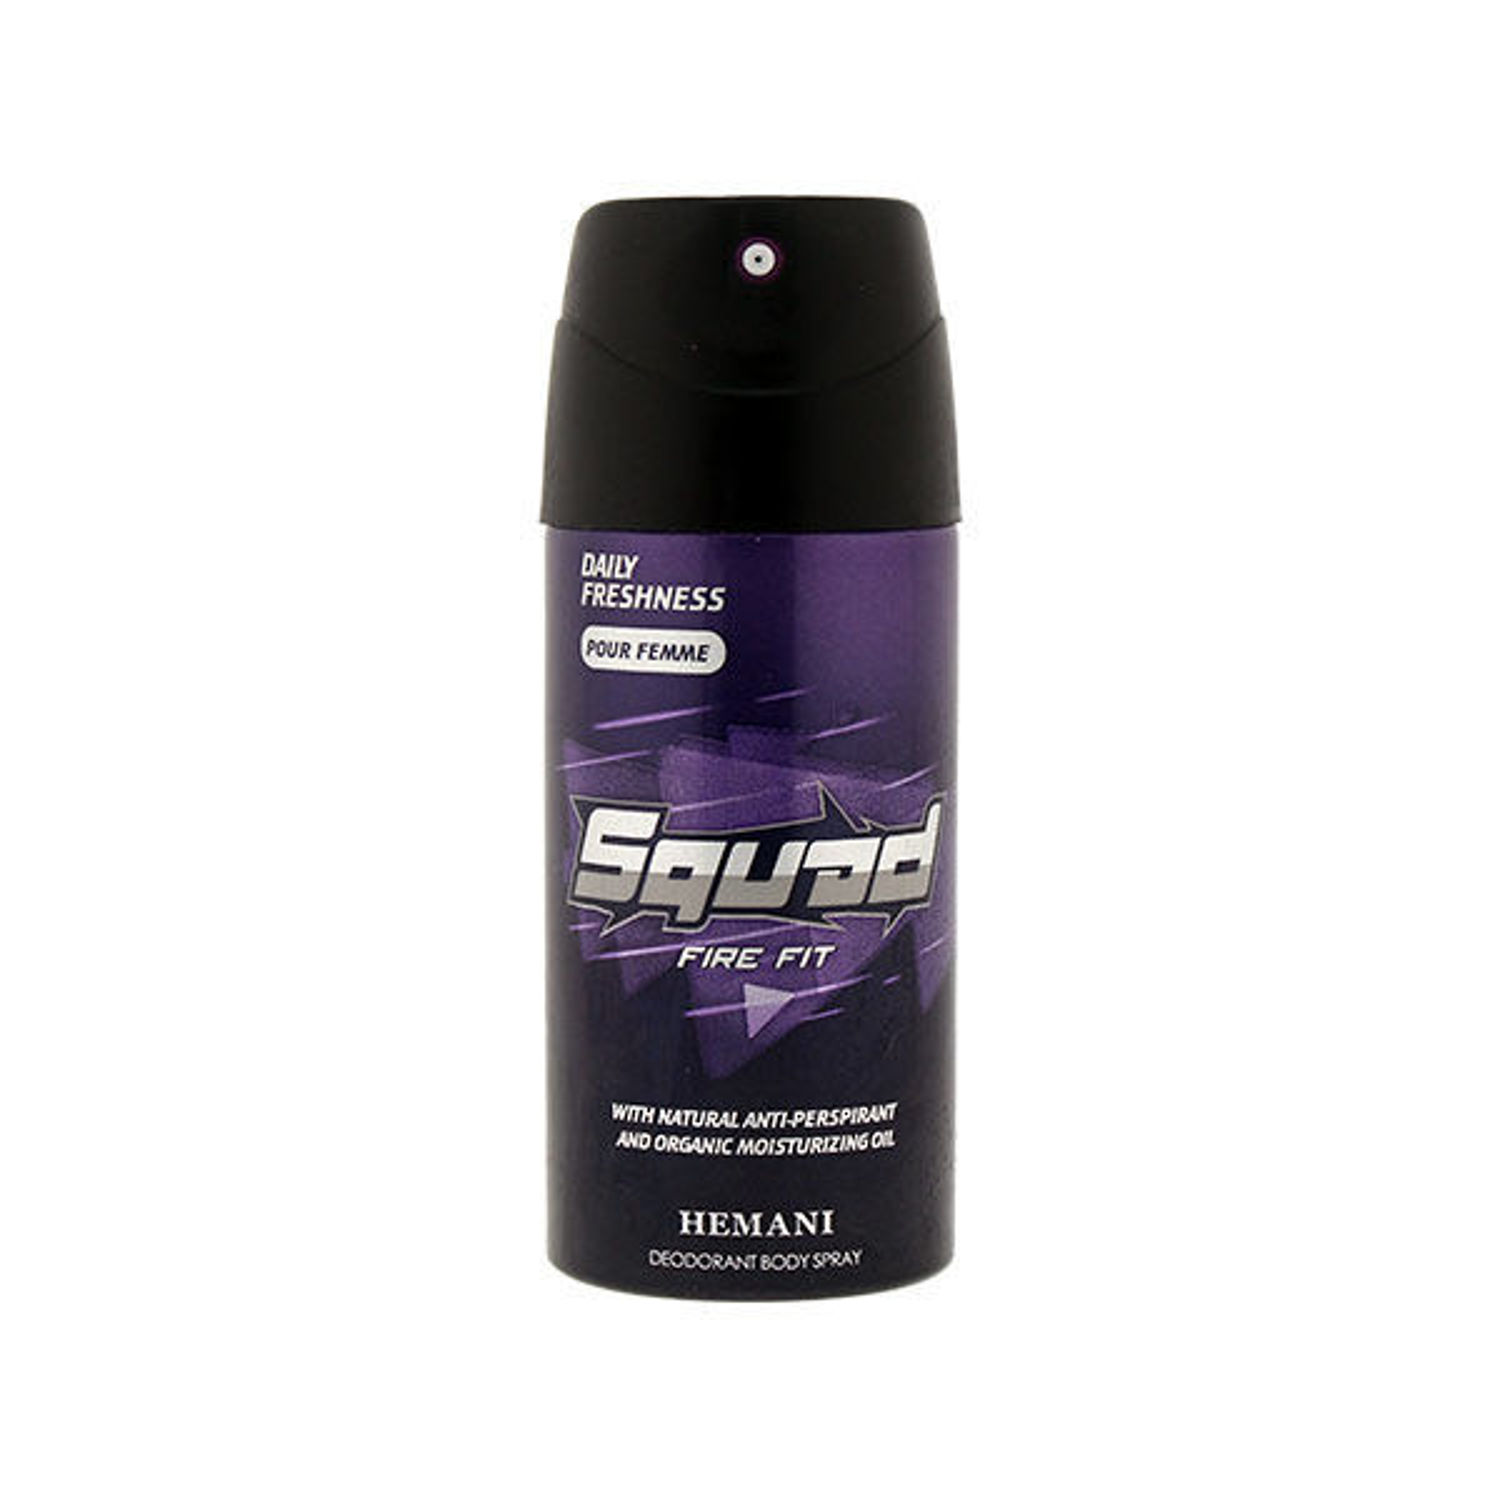 Squad Deodorant Spray Fire Fit for Women by Hemani 